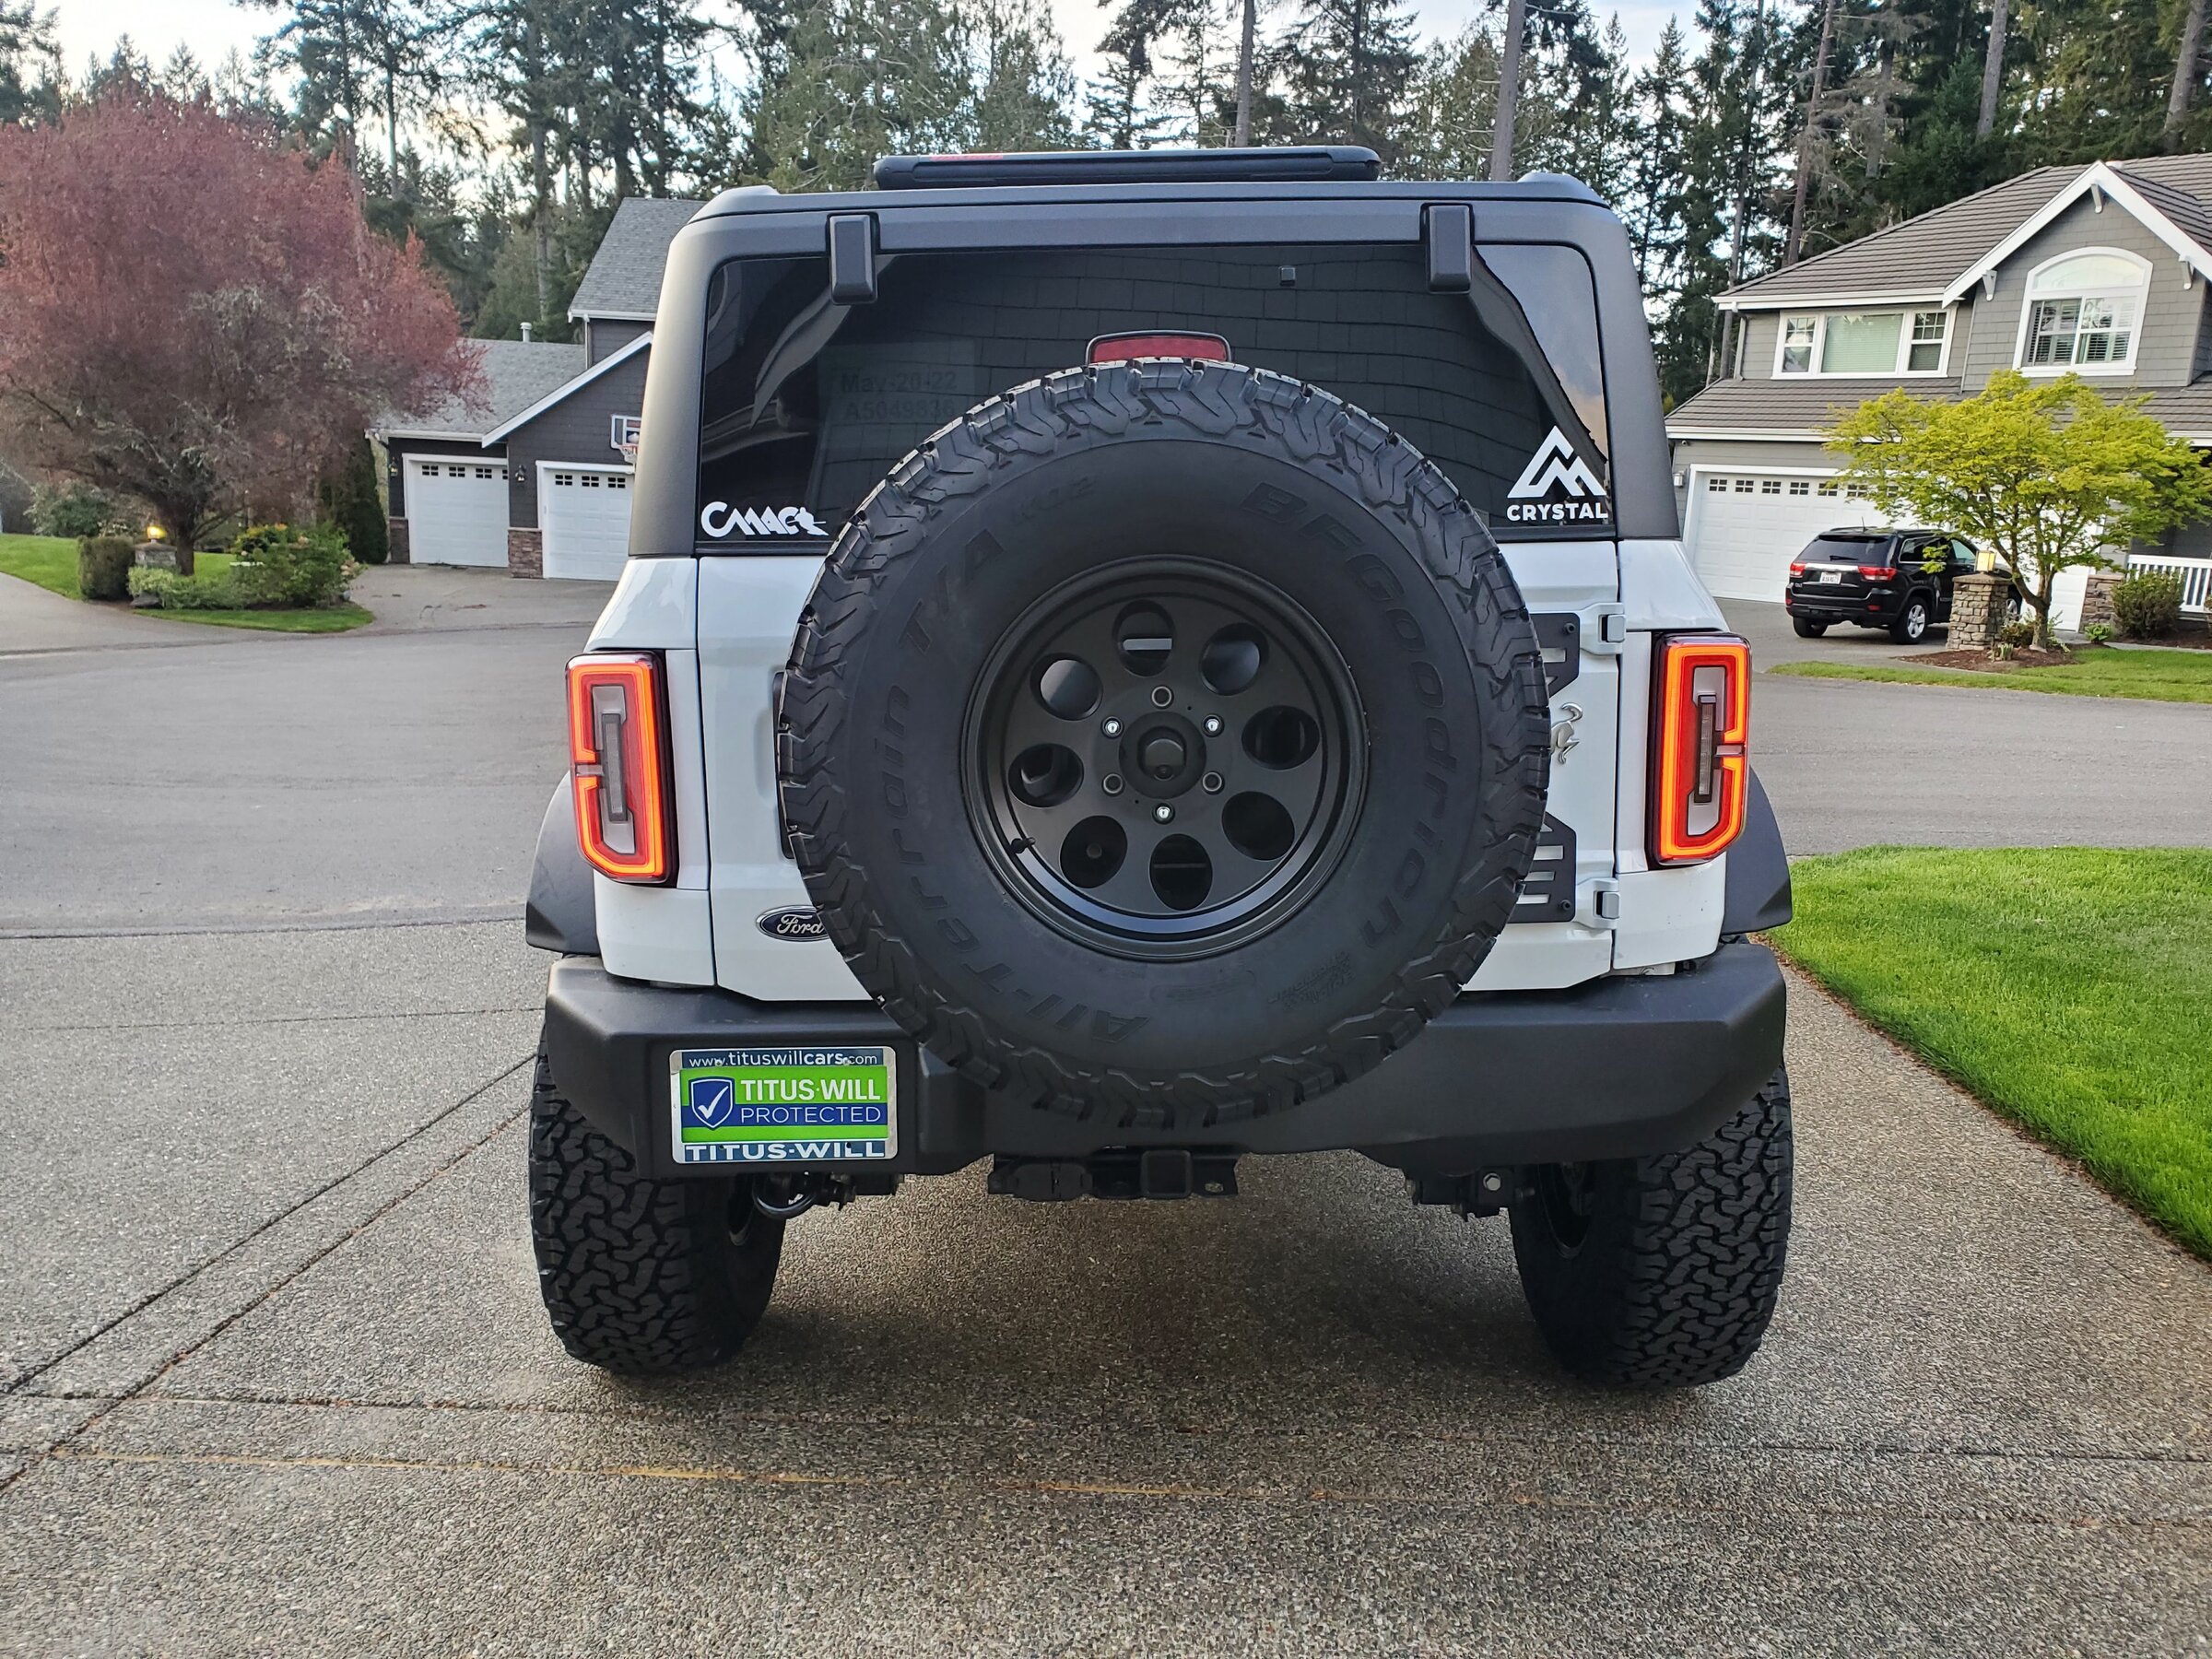 Ford Bronco Sasquatch fender flares before and after 20220411_191706